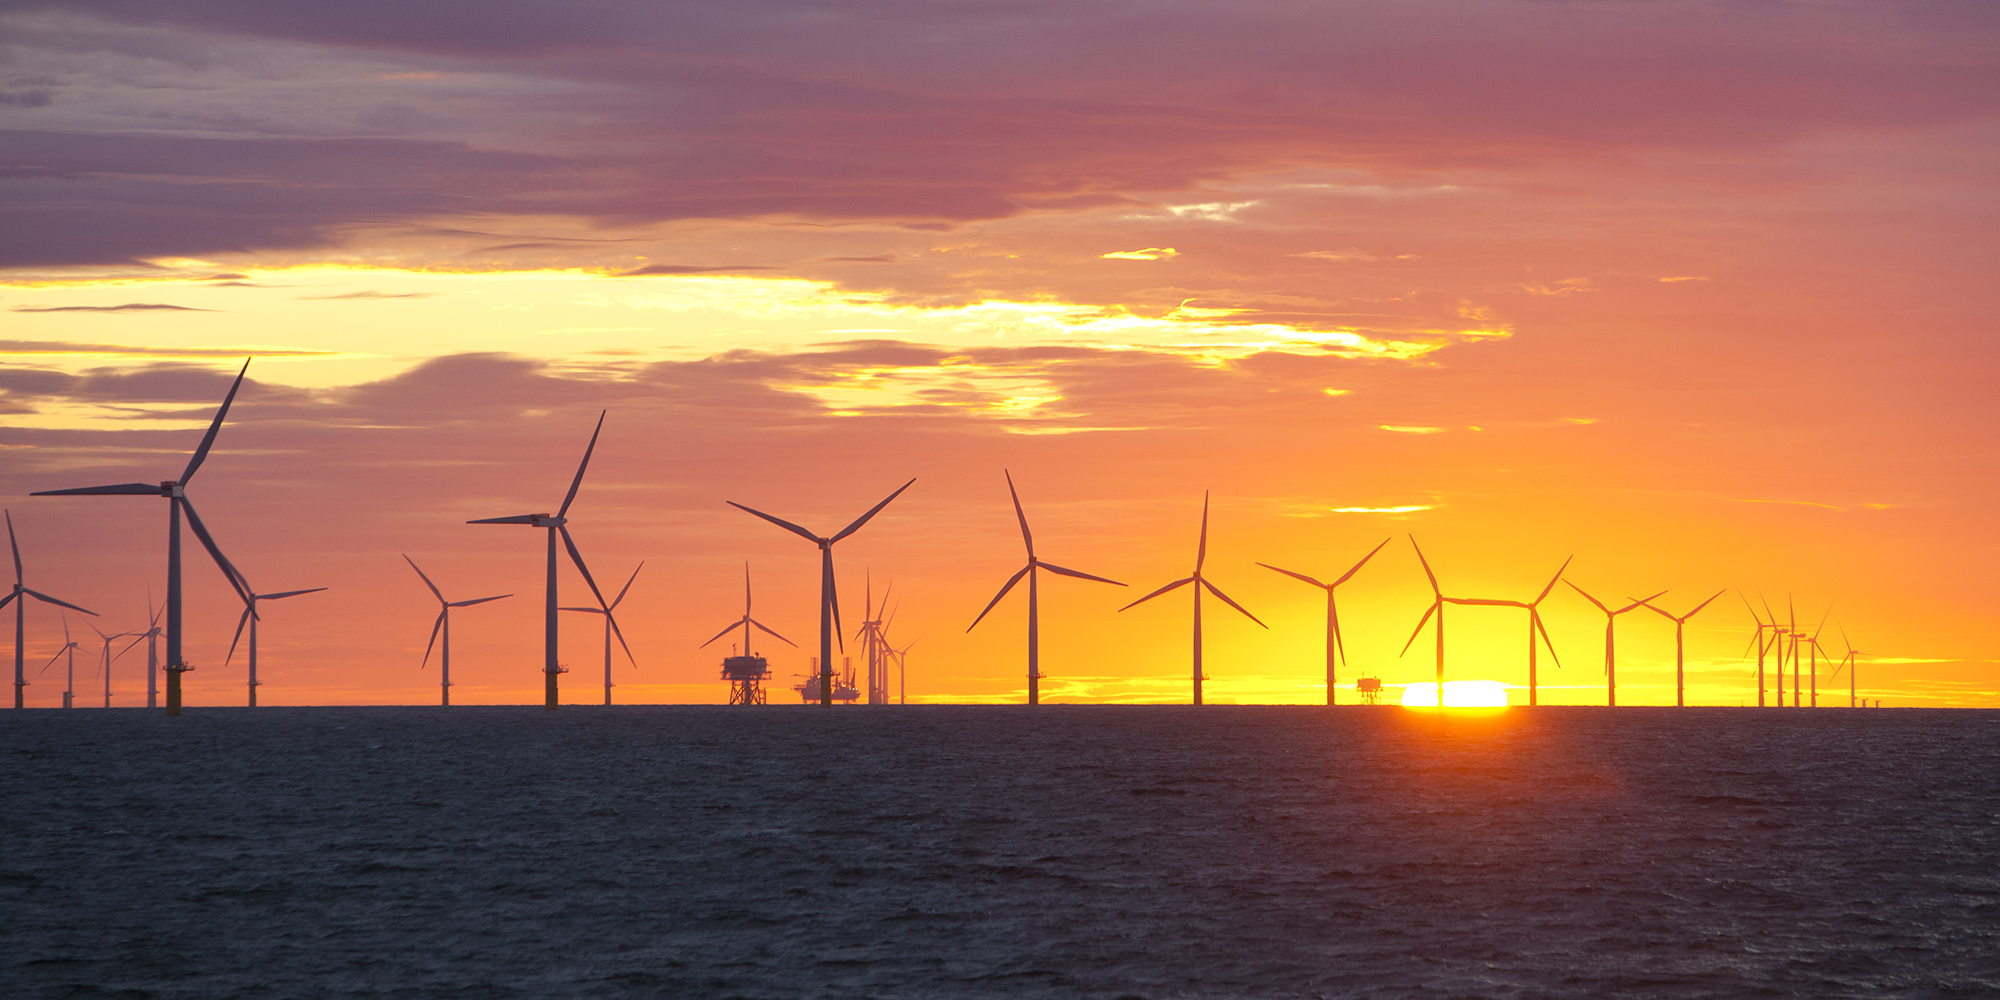 TSunset over an offshore wind farm